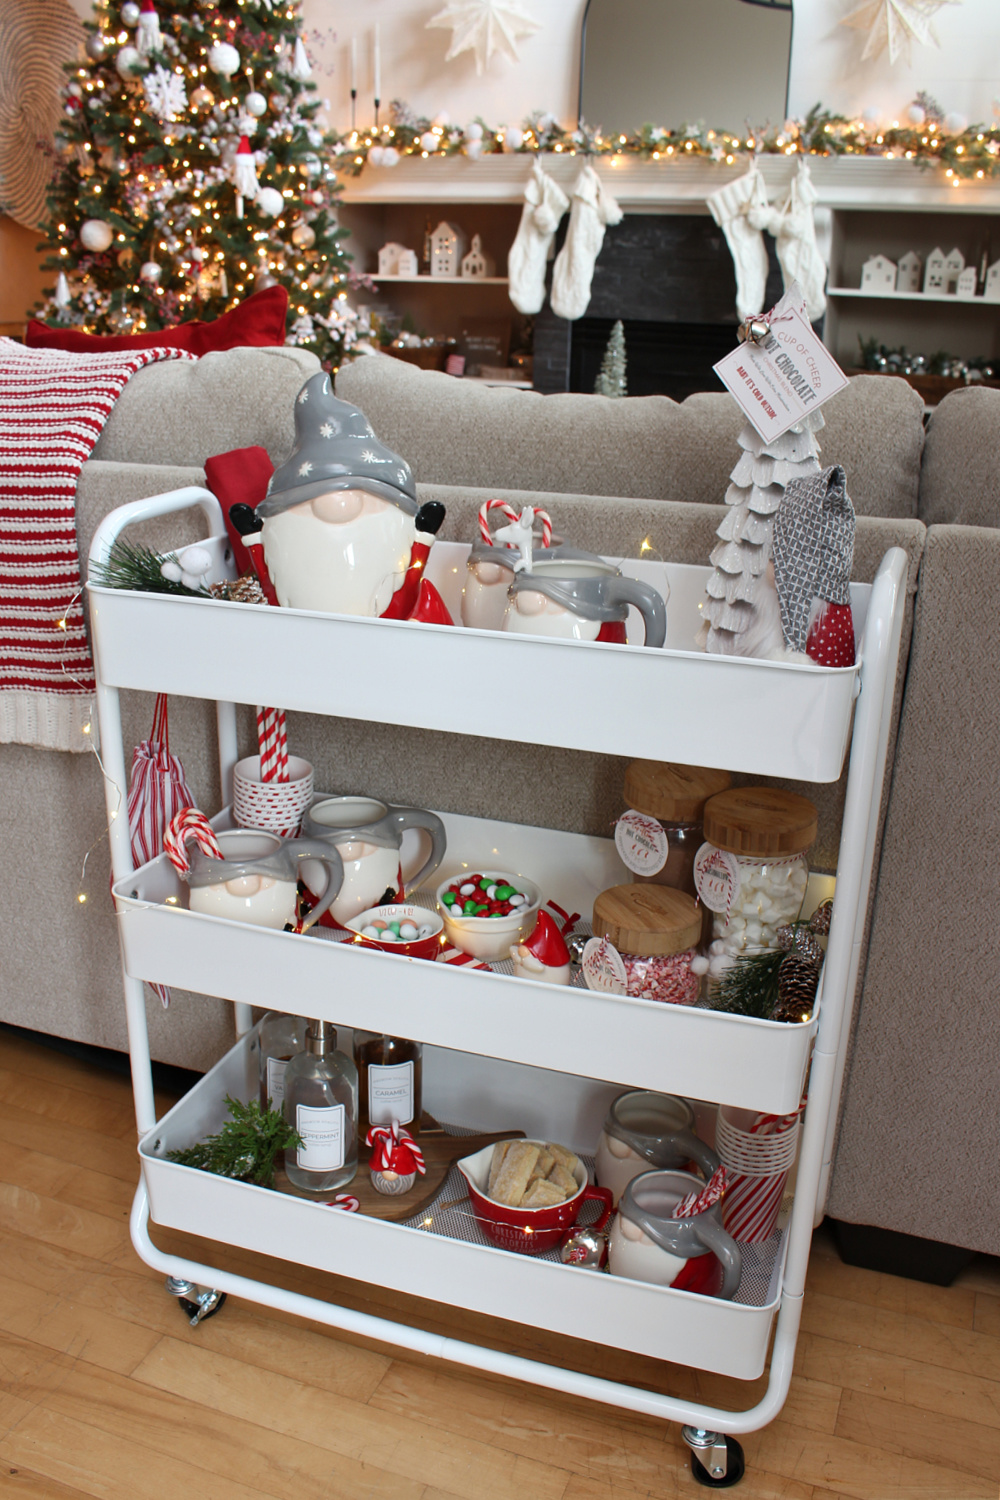 Cute hot chocolate bar cart with gnome mugs and cookie jar.